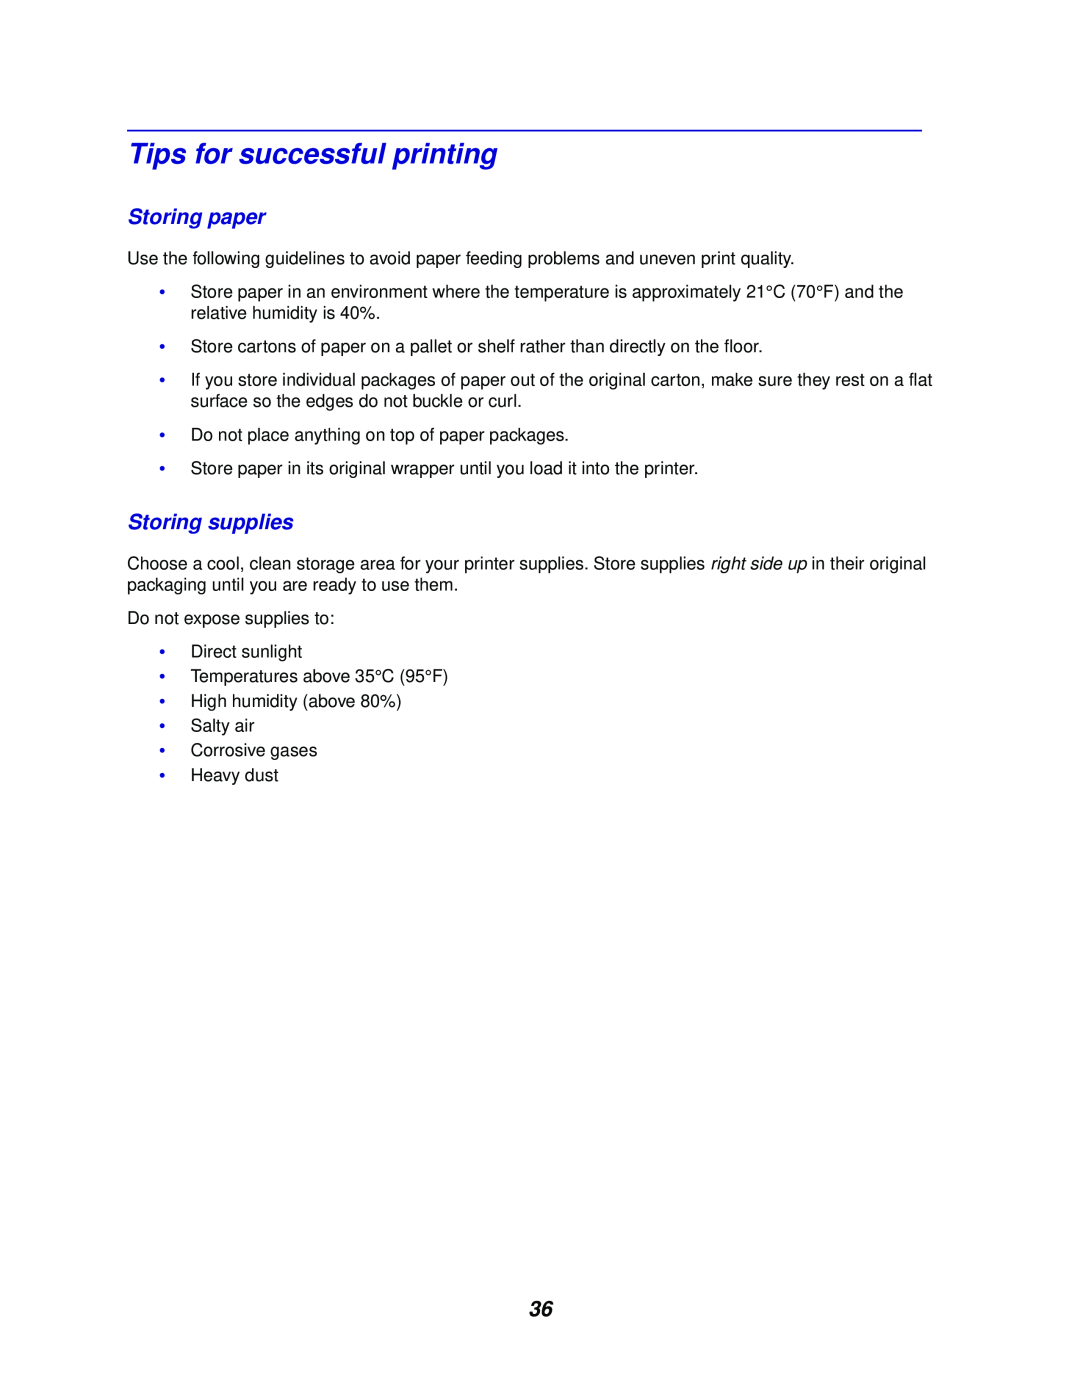 Lexmark 762 manual Tips for successful printing, Storing paper, Storing supplies 